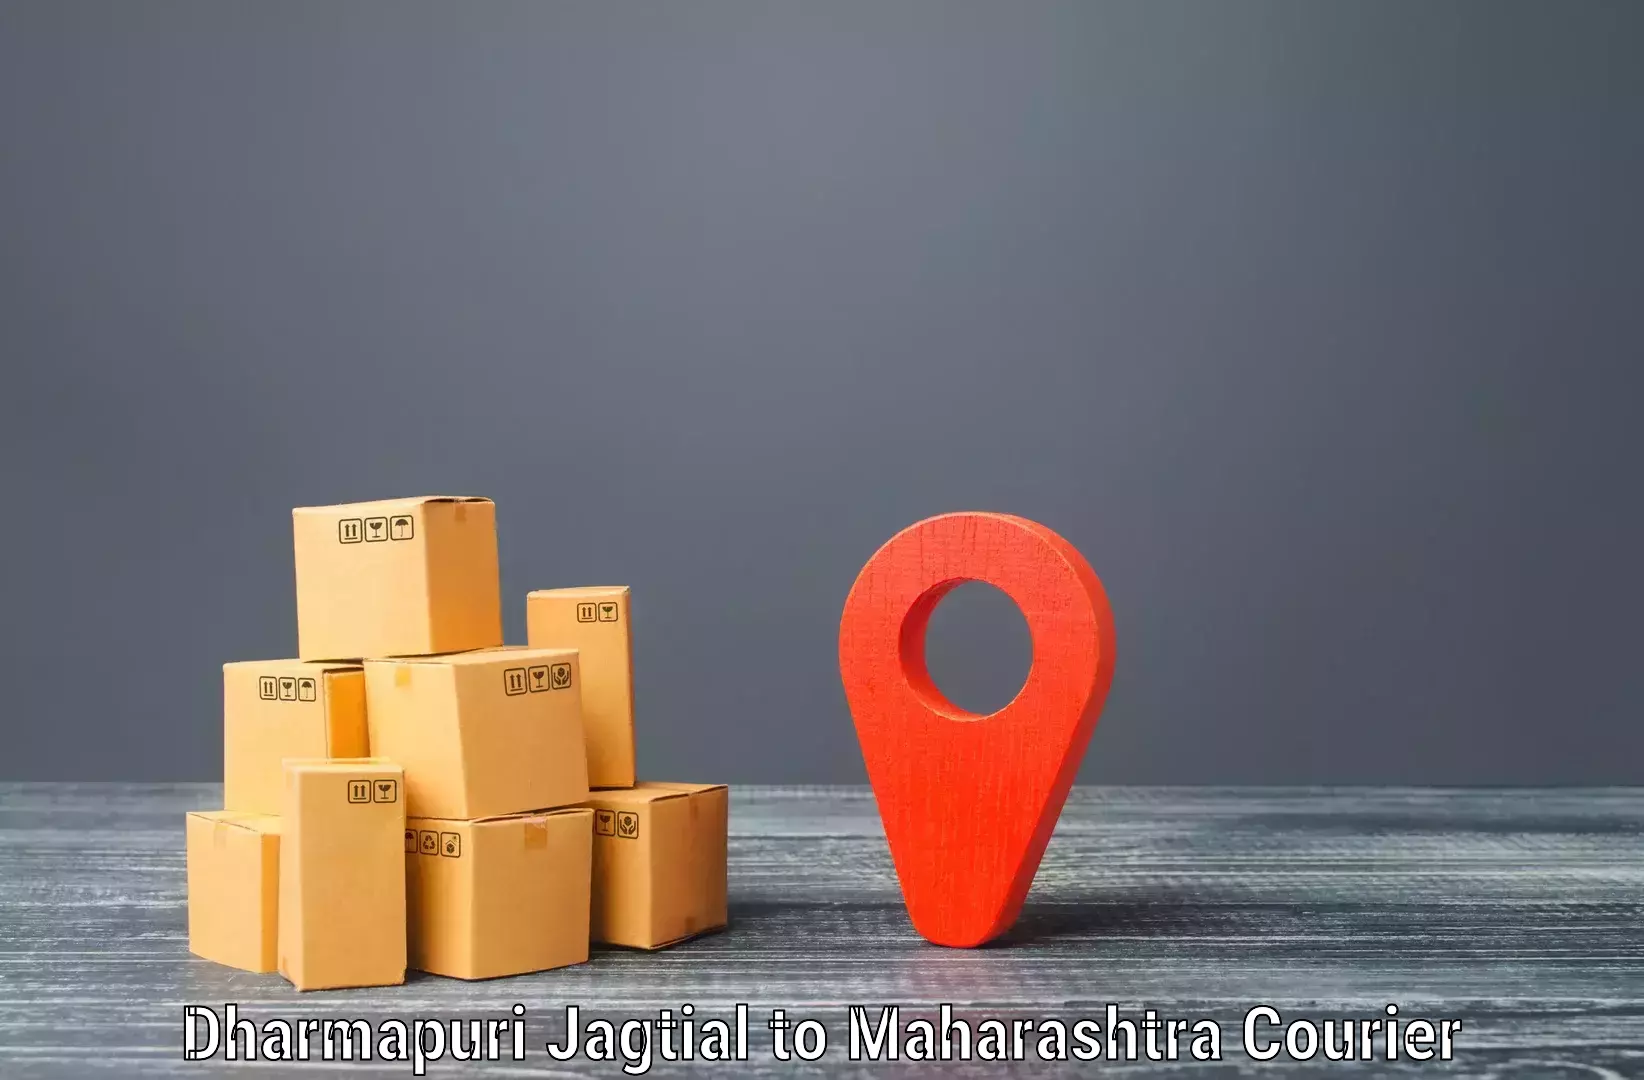 State-of-the-art courier technology Dharmapuri Jagtial to Khamgaon